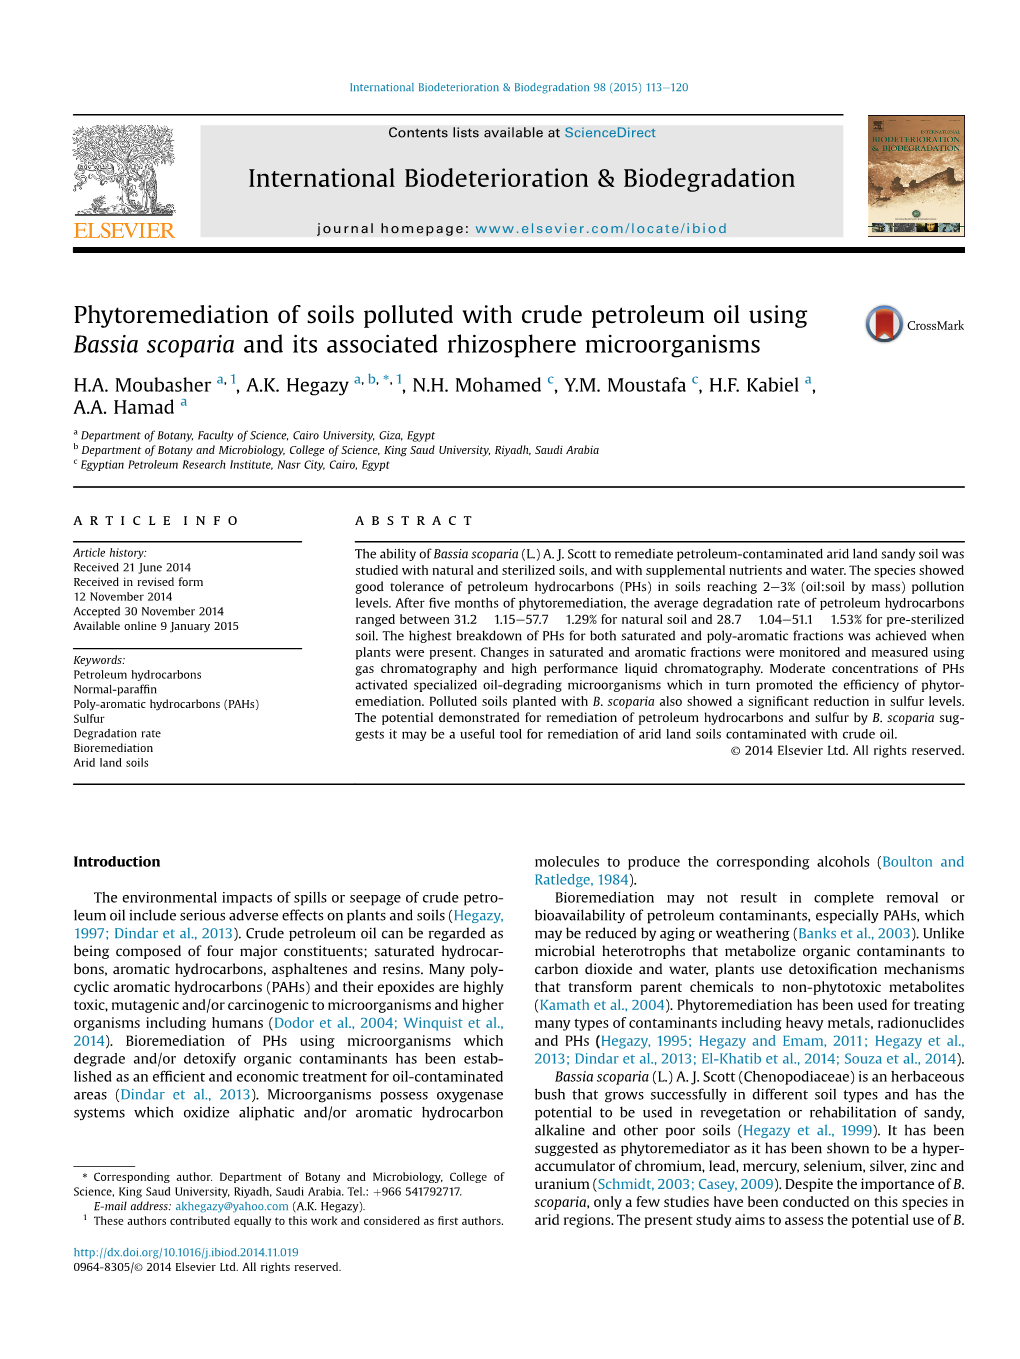 Phytoremediation of Soils Polluted with Crude Petroleum Oil Using Bassia Scoparia and Its Associated Rhizosphere Microorganisms